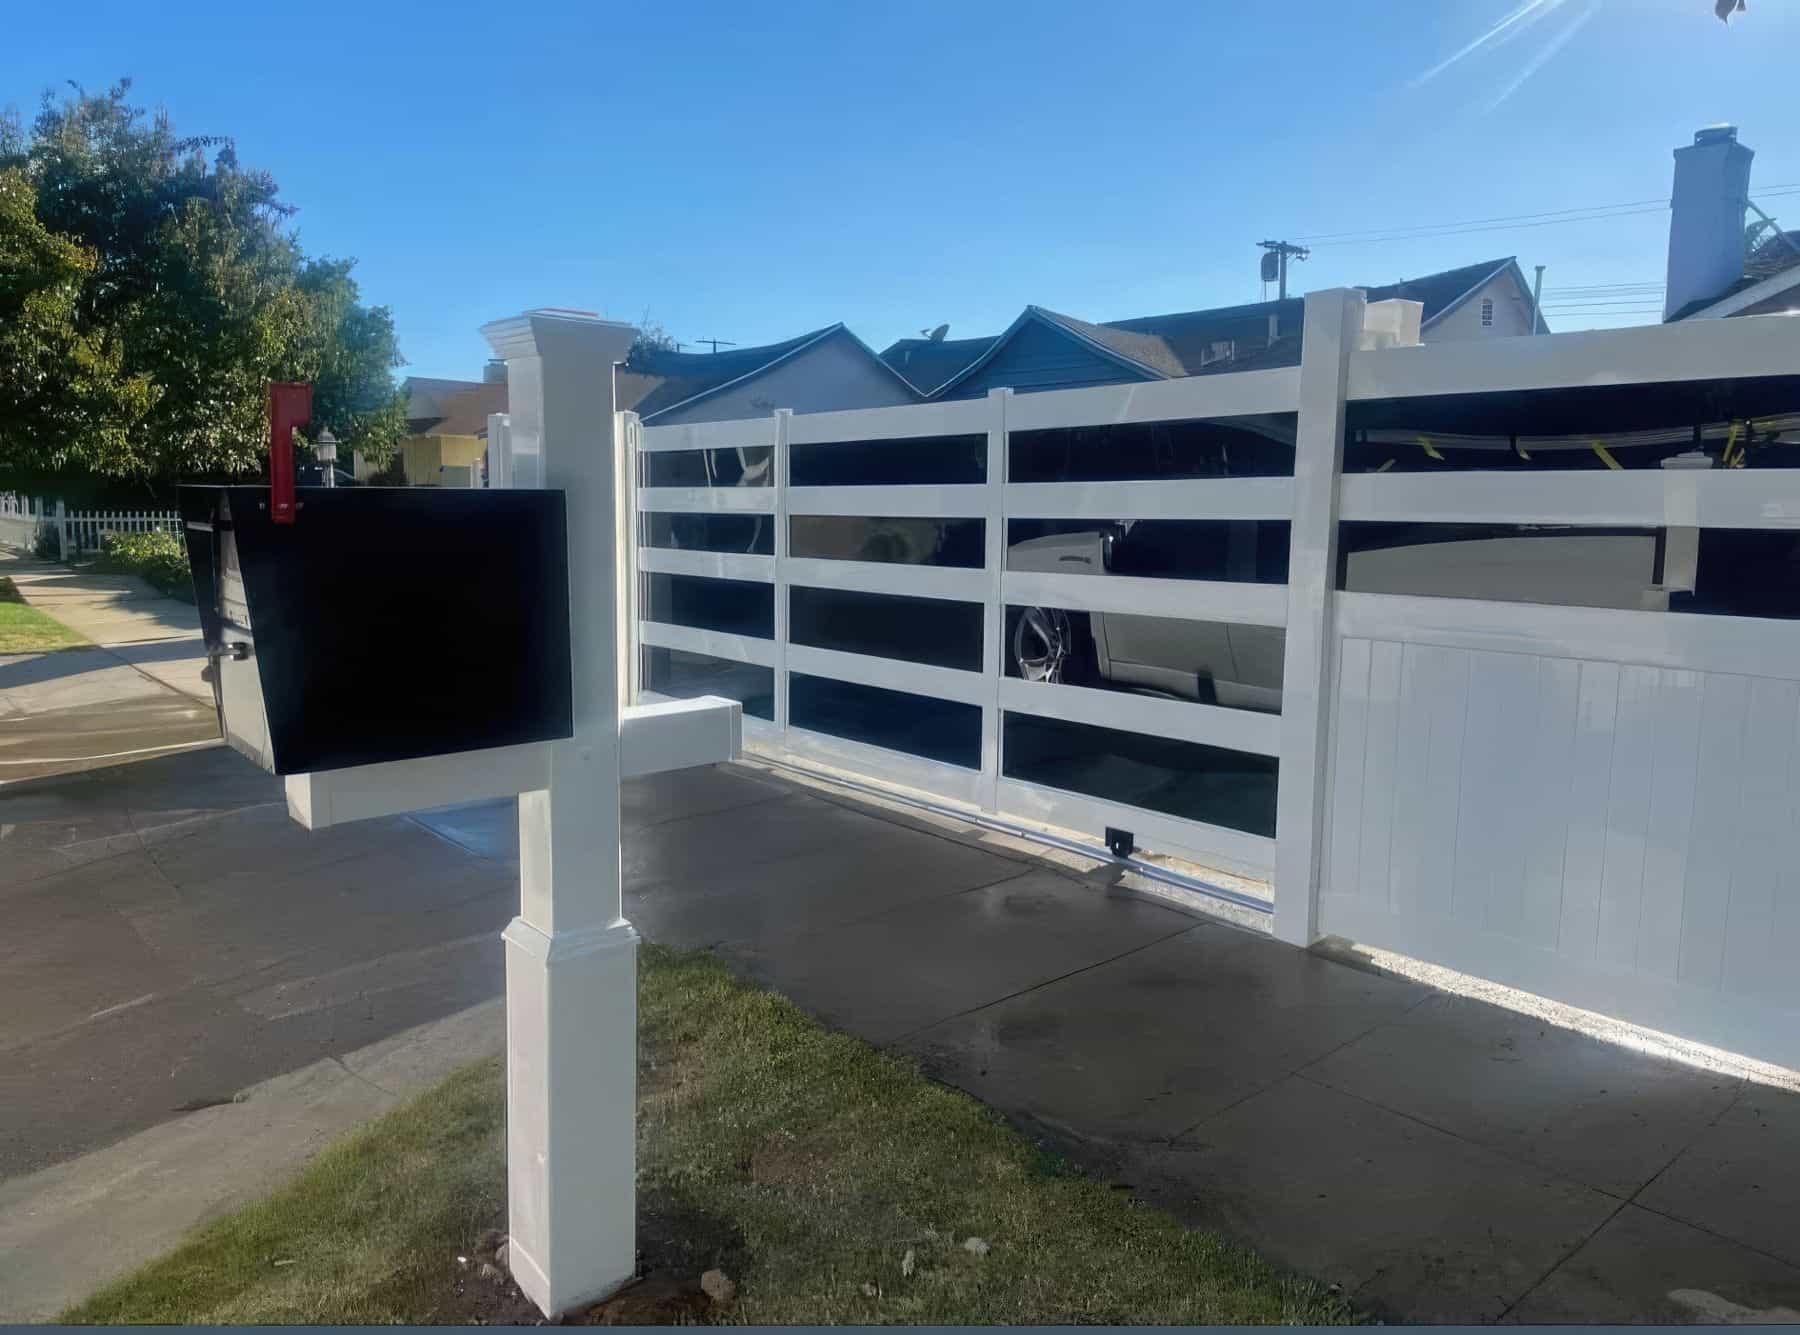 Vinyl rolling gate featuring reflective glass sections with traditional a mailbox on grassy patches beside the sidewalk.